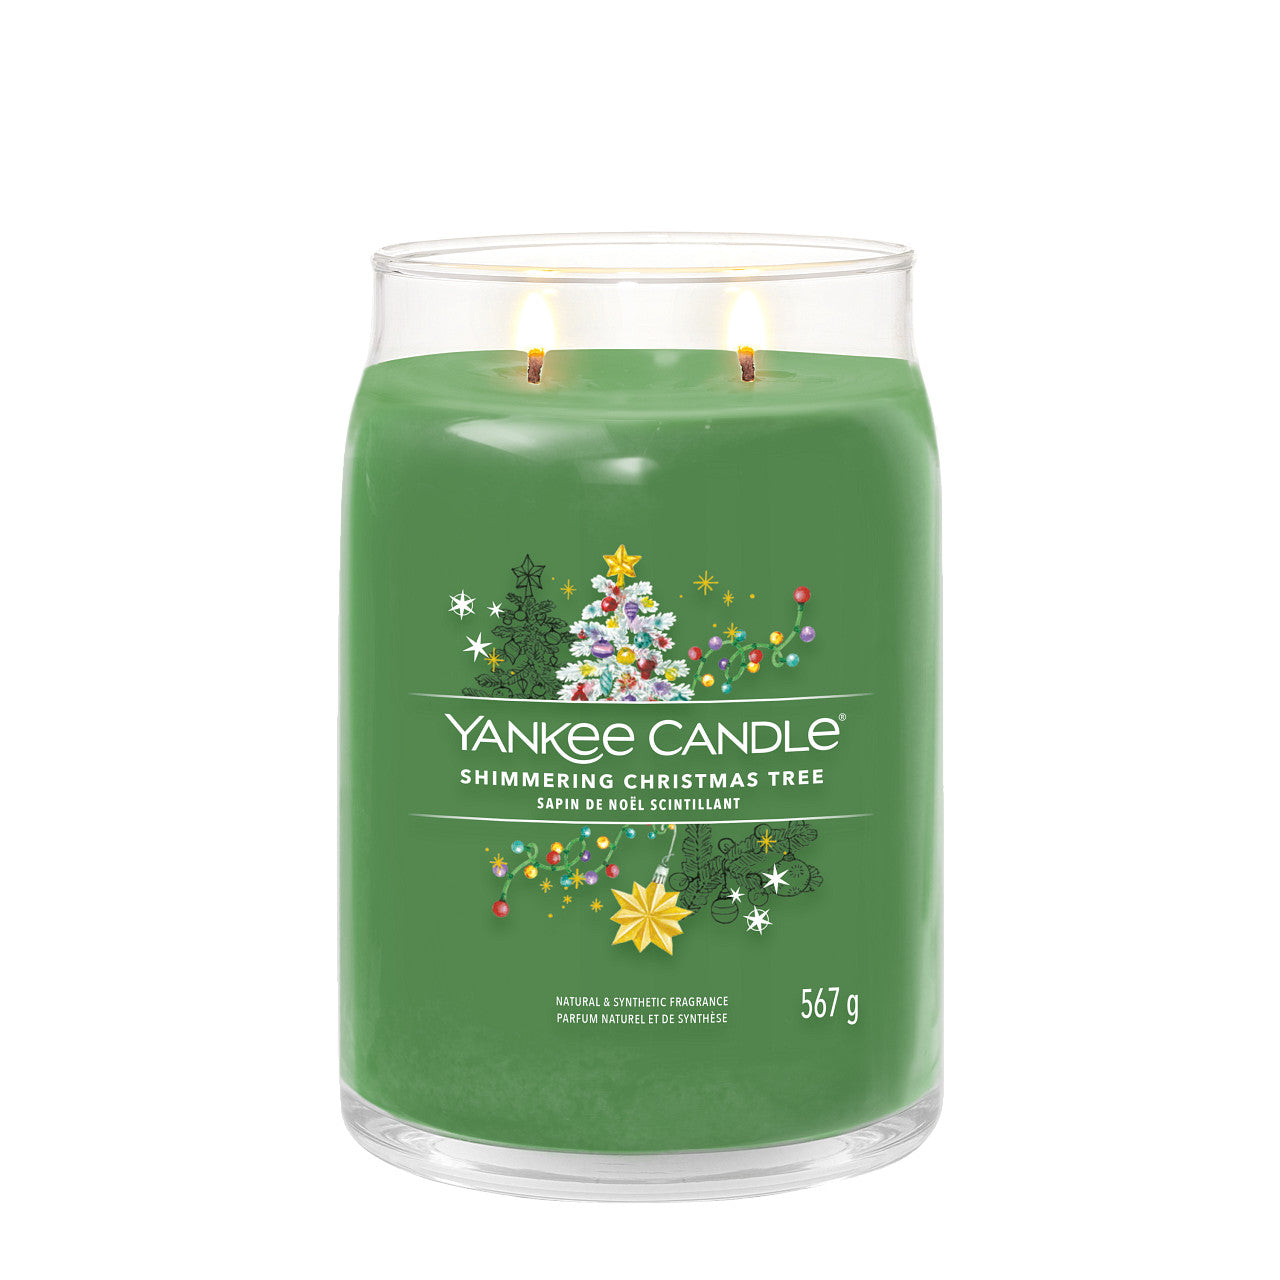 Shimmering Christmas Tree - Signature Large Jar Scented Candle